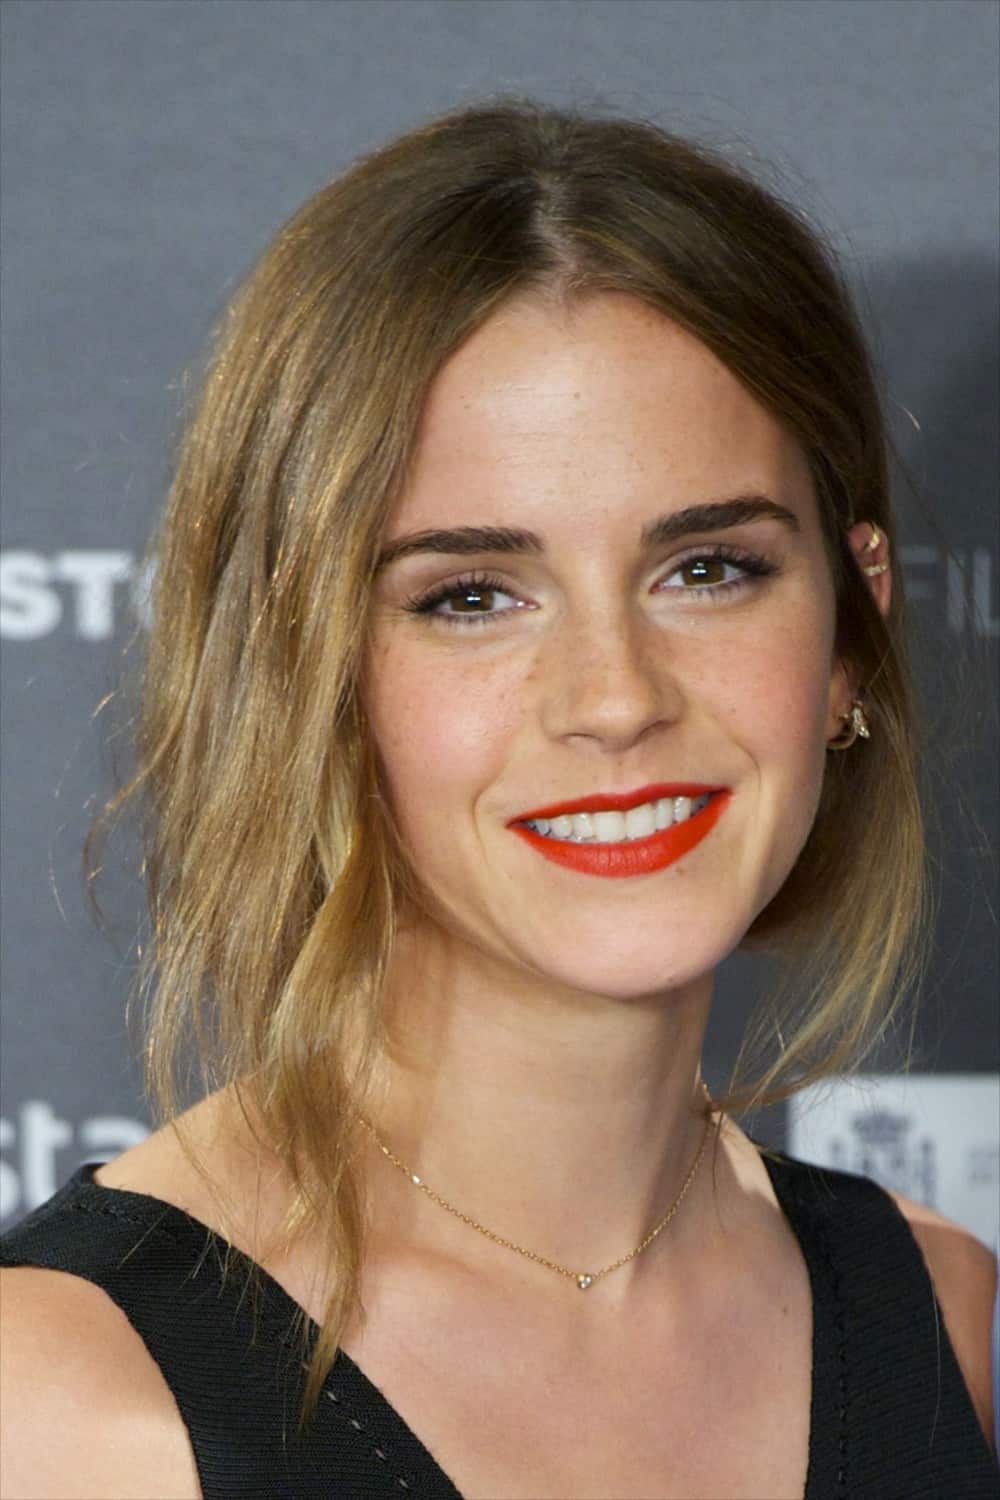 Emma Watson Flaunts her Impeccable Style at the Movie Premiere in Madrid